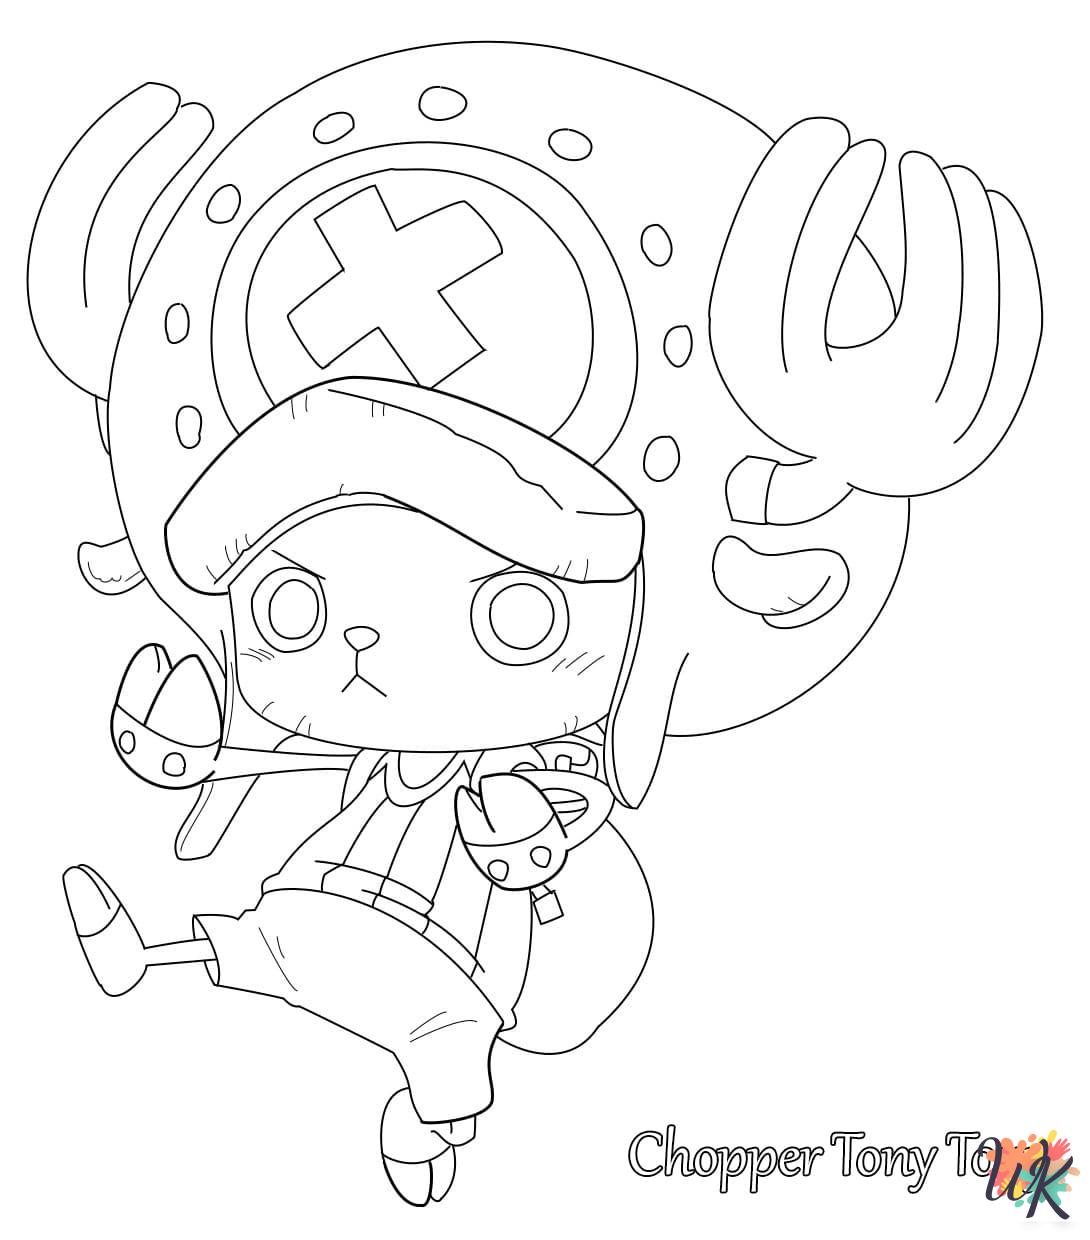 One Piece coloring pages to print